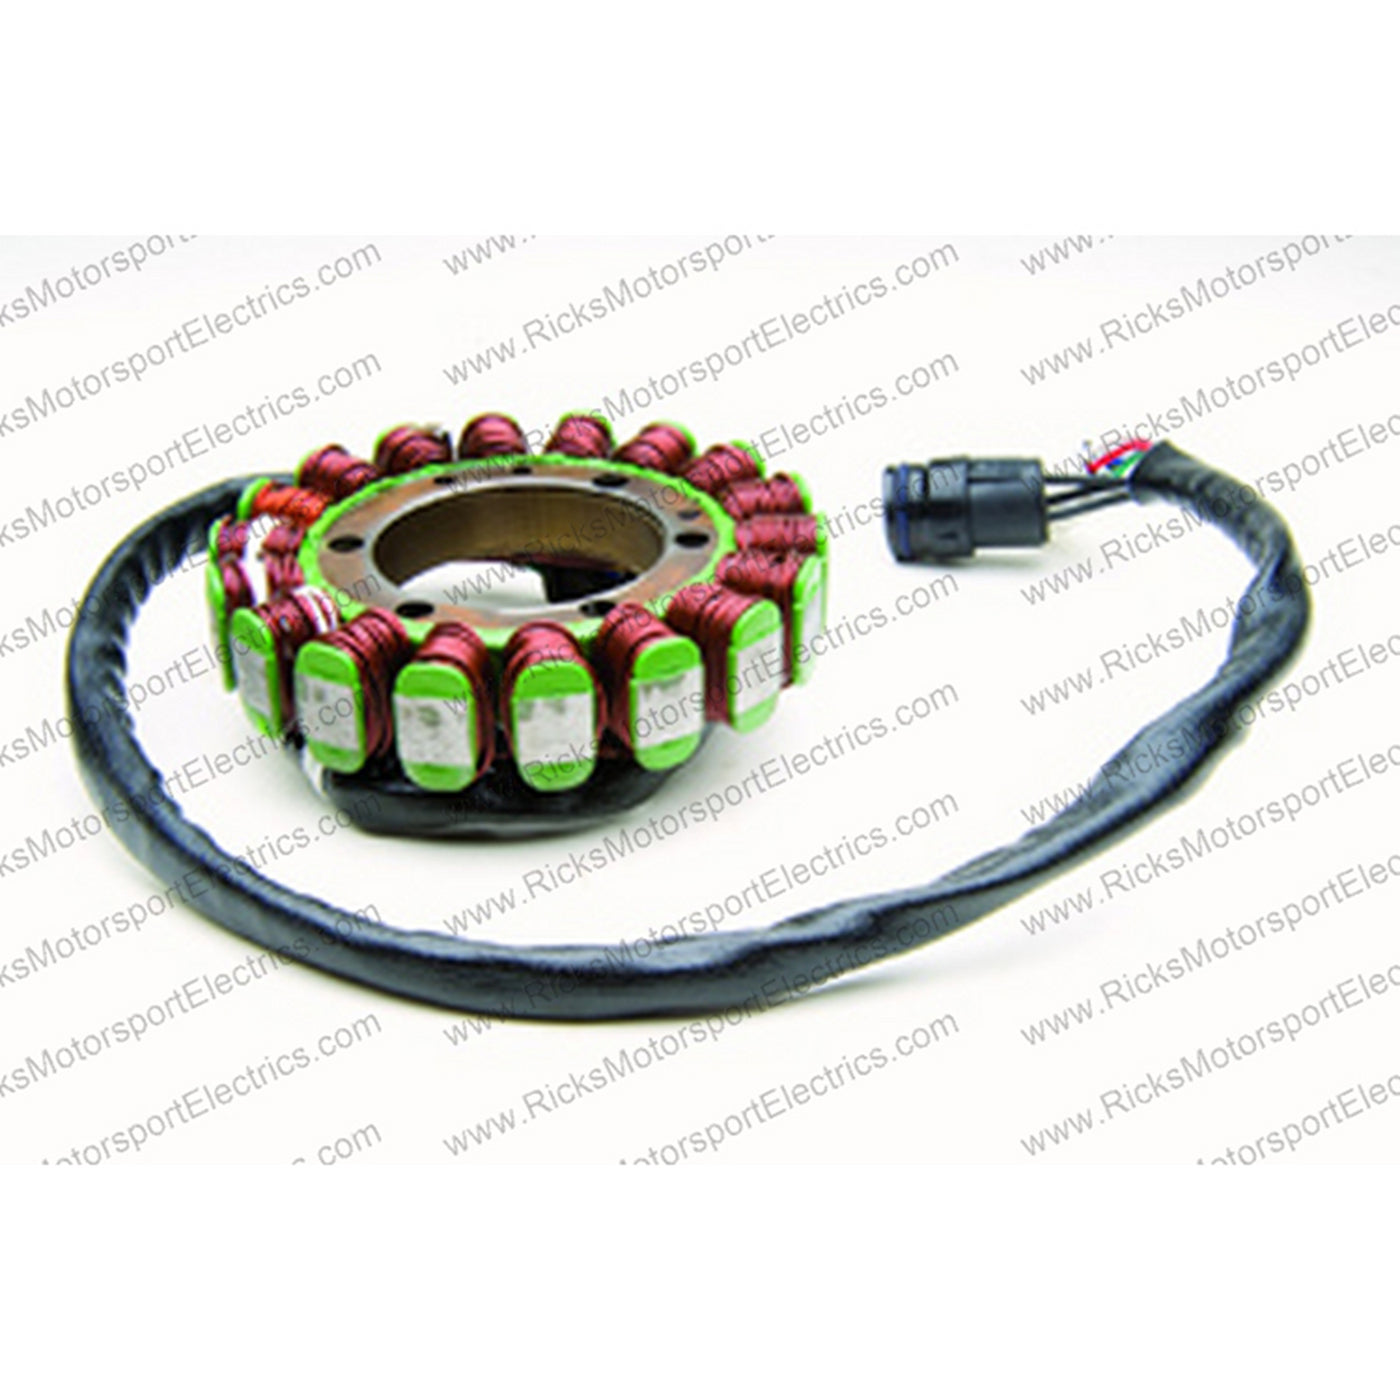 RICK'S ELECTRIC, HIGH OUTPUT STATOR#mpn_21-968H